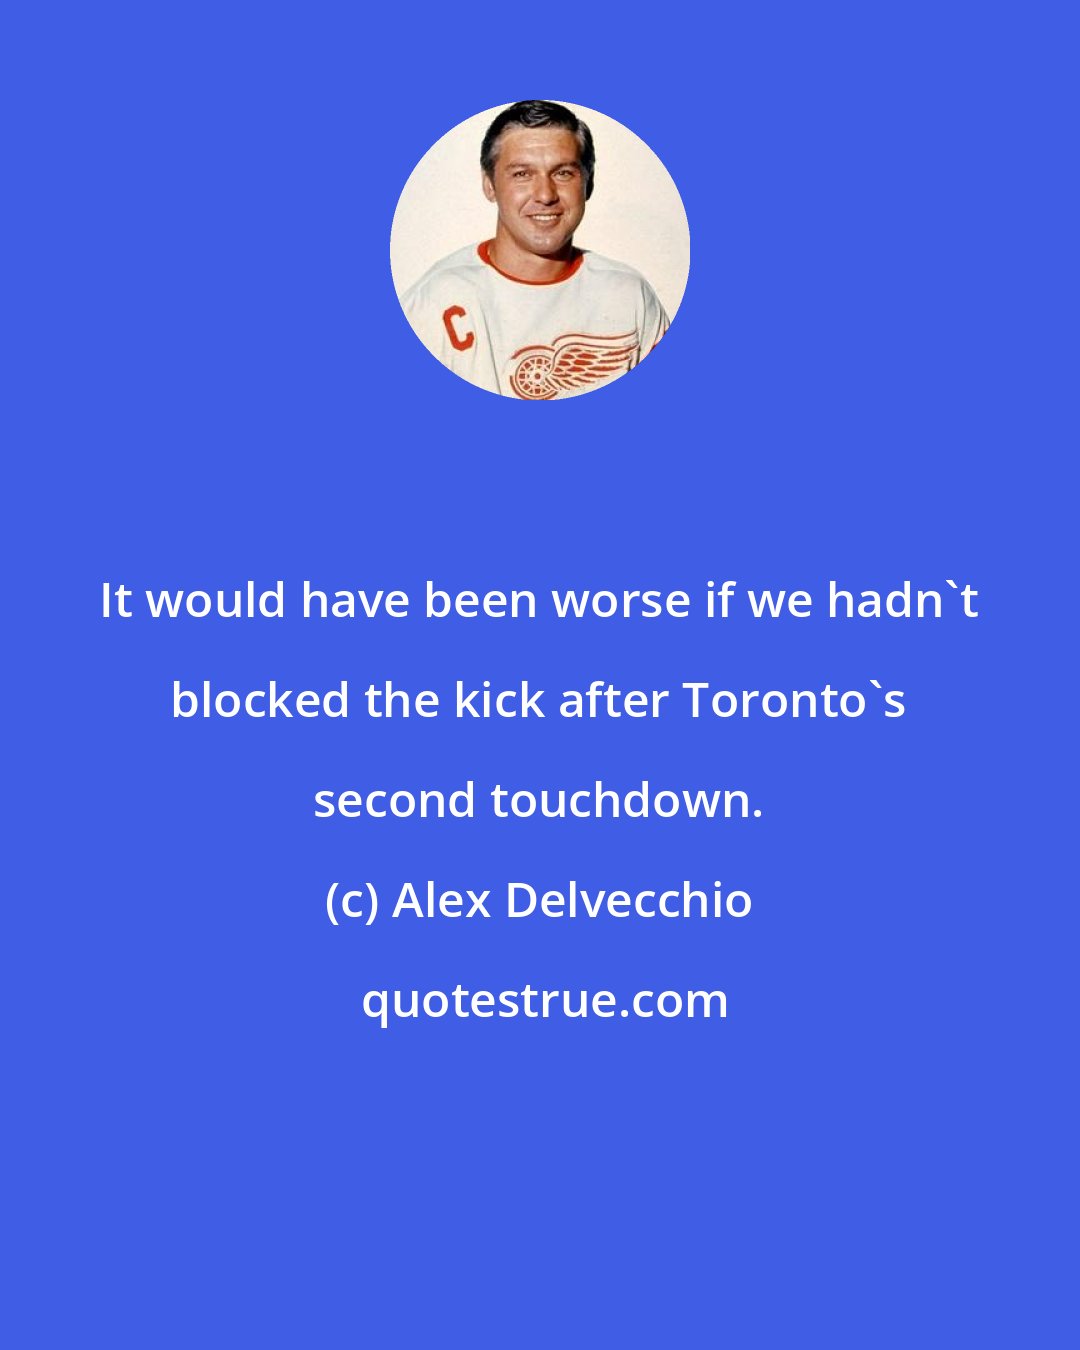 Alex Delvecchio: It would have been worse if we hadn't blocked the kick after Toronto's second touchdown.